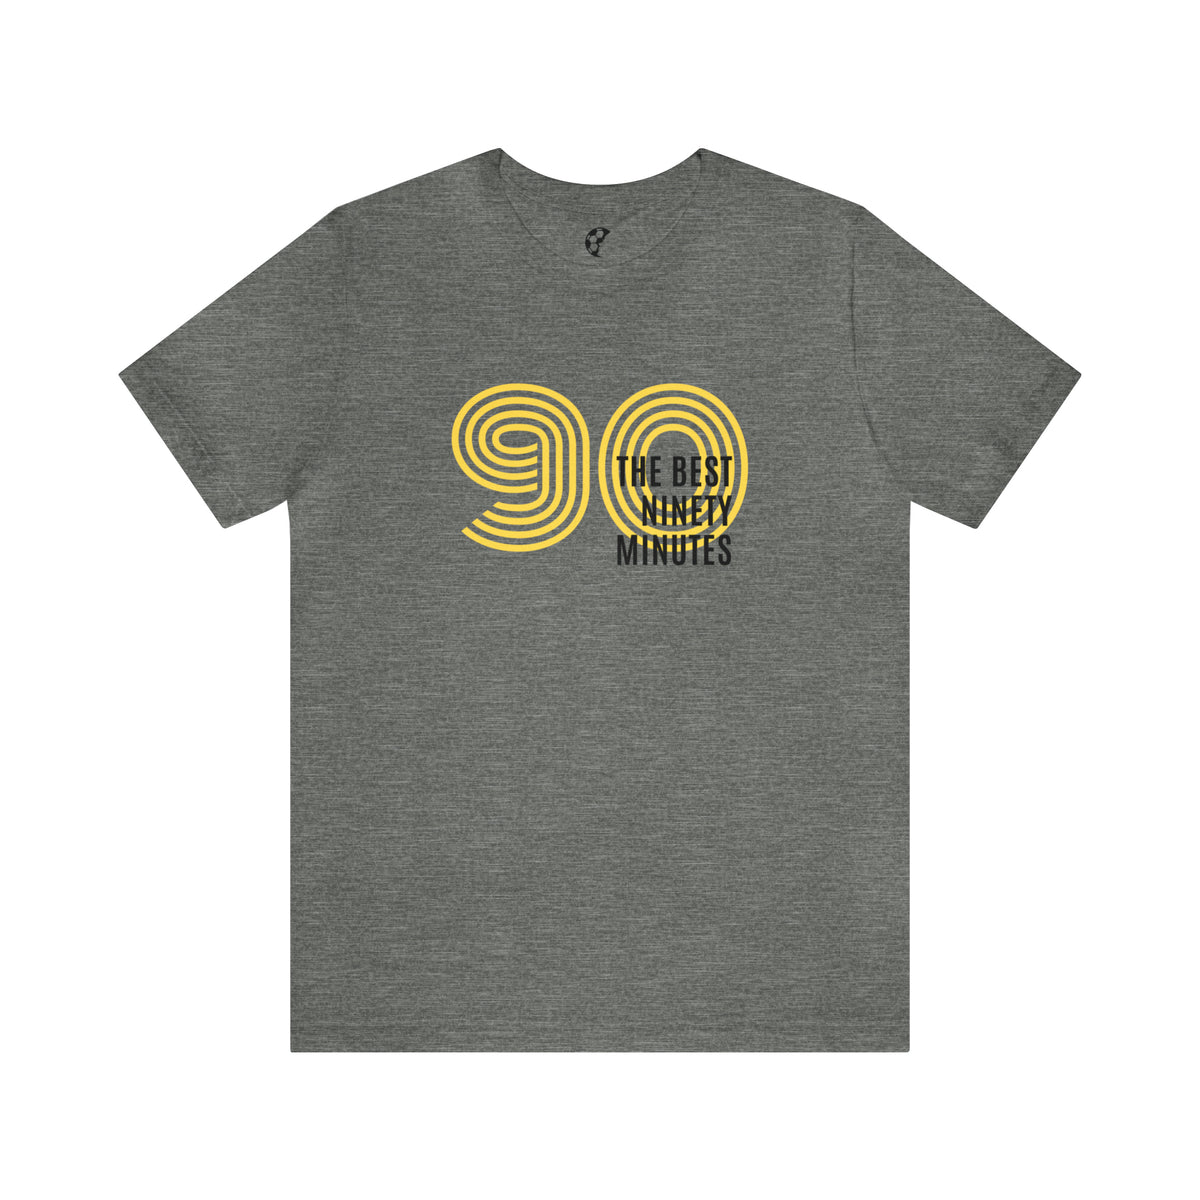 The Best 90 Minutes Adult T-Shirt